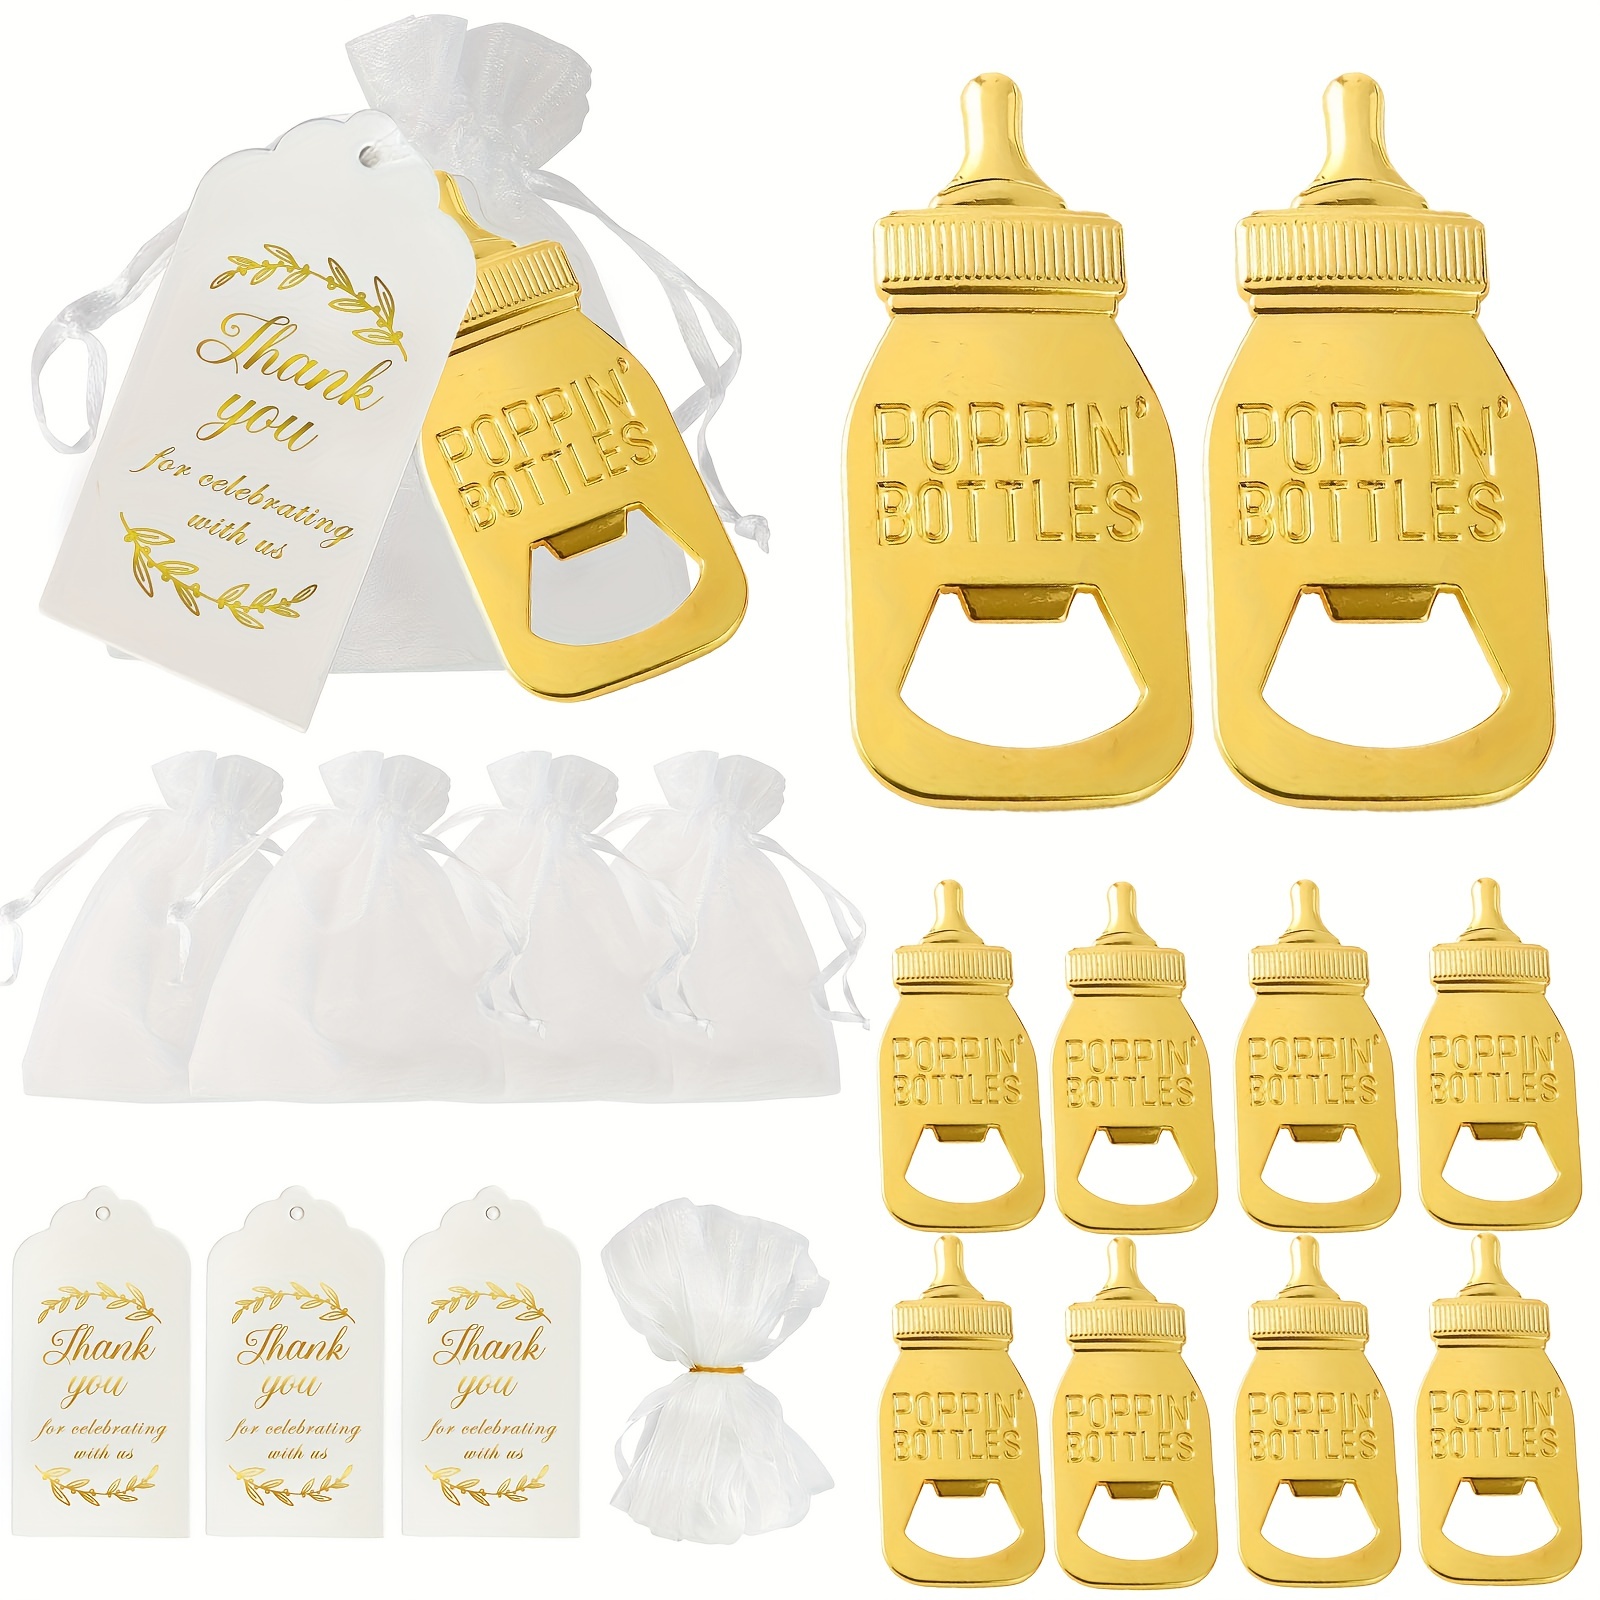 RekTak Baby Shower Favors, 40 Sets Guest Return Gifts Include Animal Keychain, Organza Bags and Thank You Tags for Party Favors Baby Shower Prizes Boys